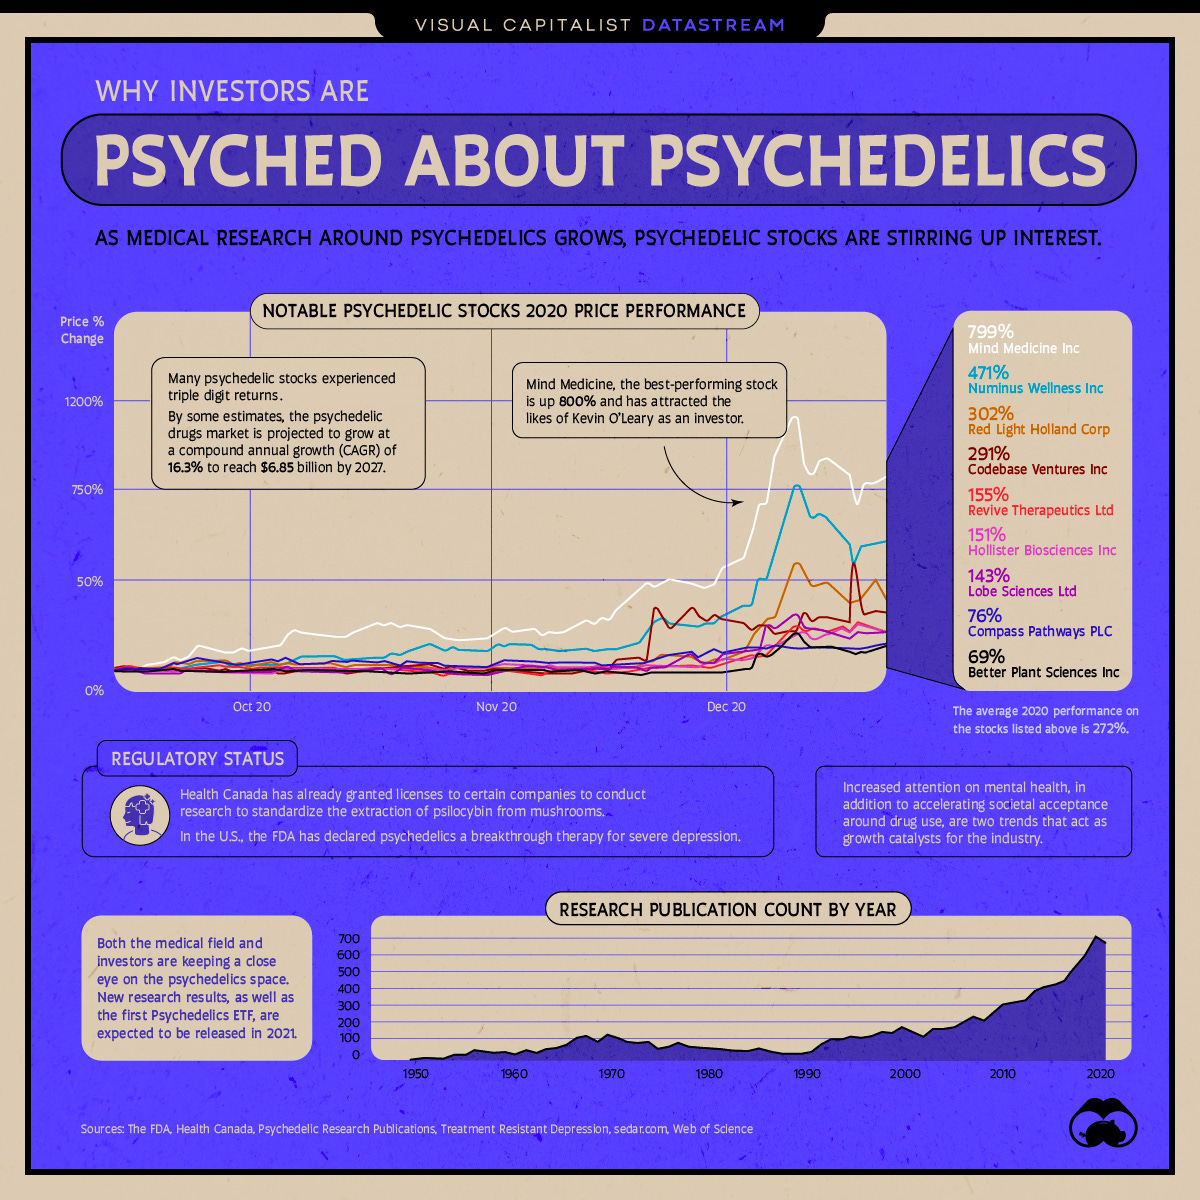 Why Investors Are Psyched About Psychedelic Stocks